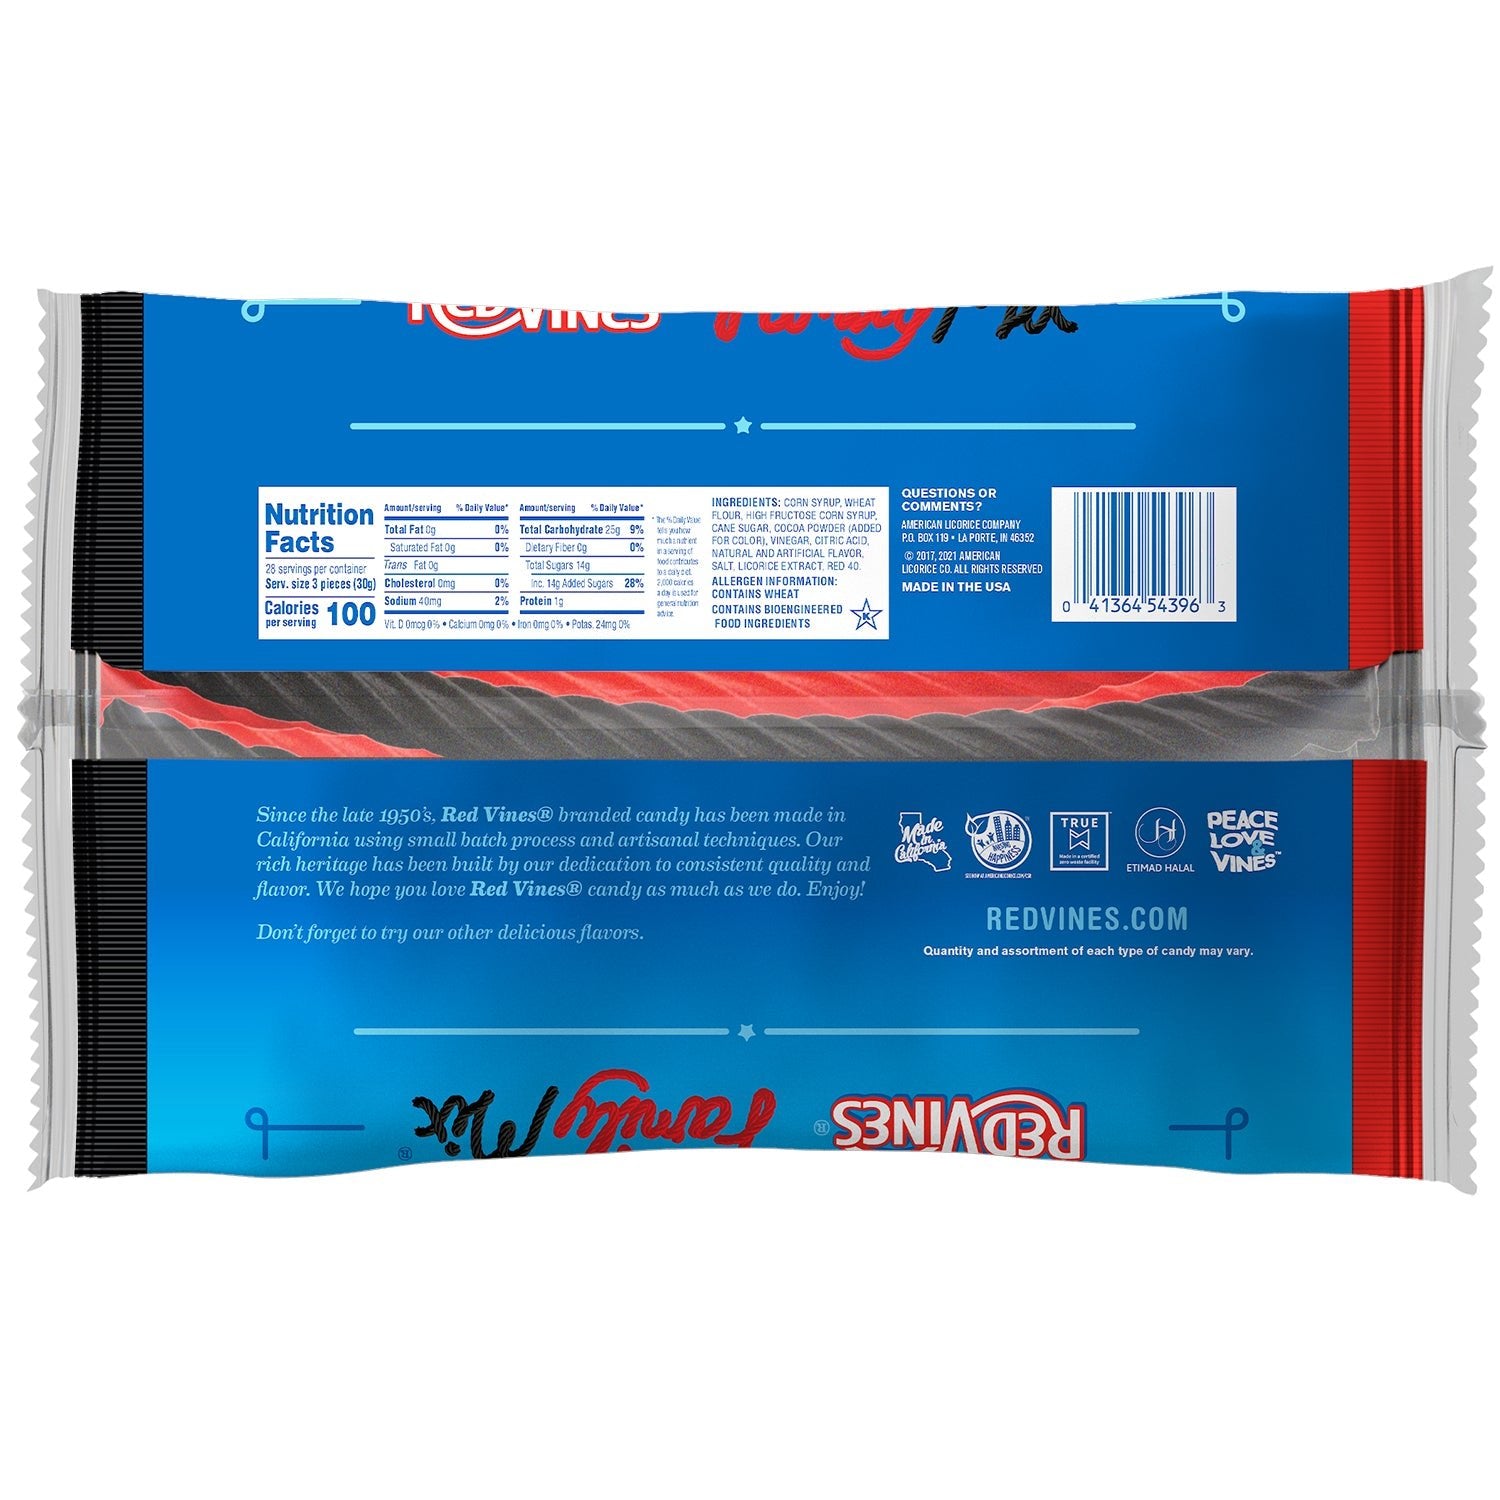 RED VINES Red & Black Licorice Family Mix, back of 30oz Bag